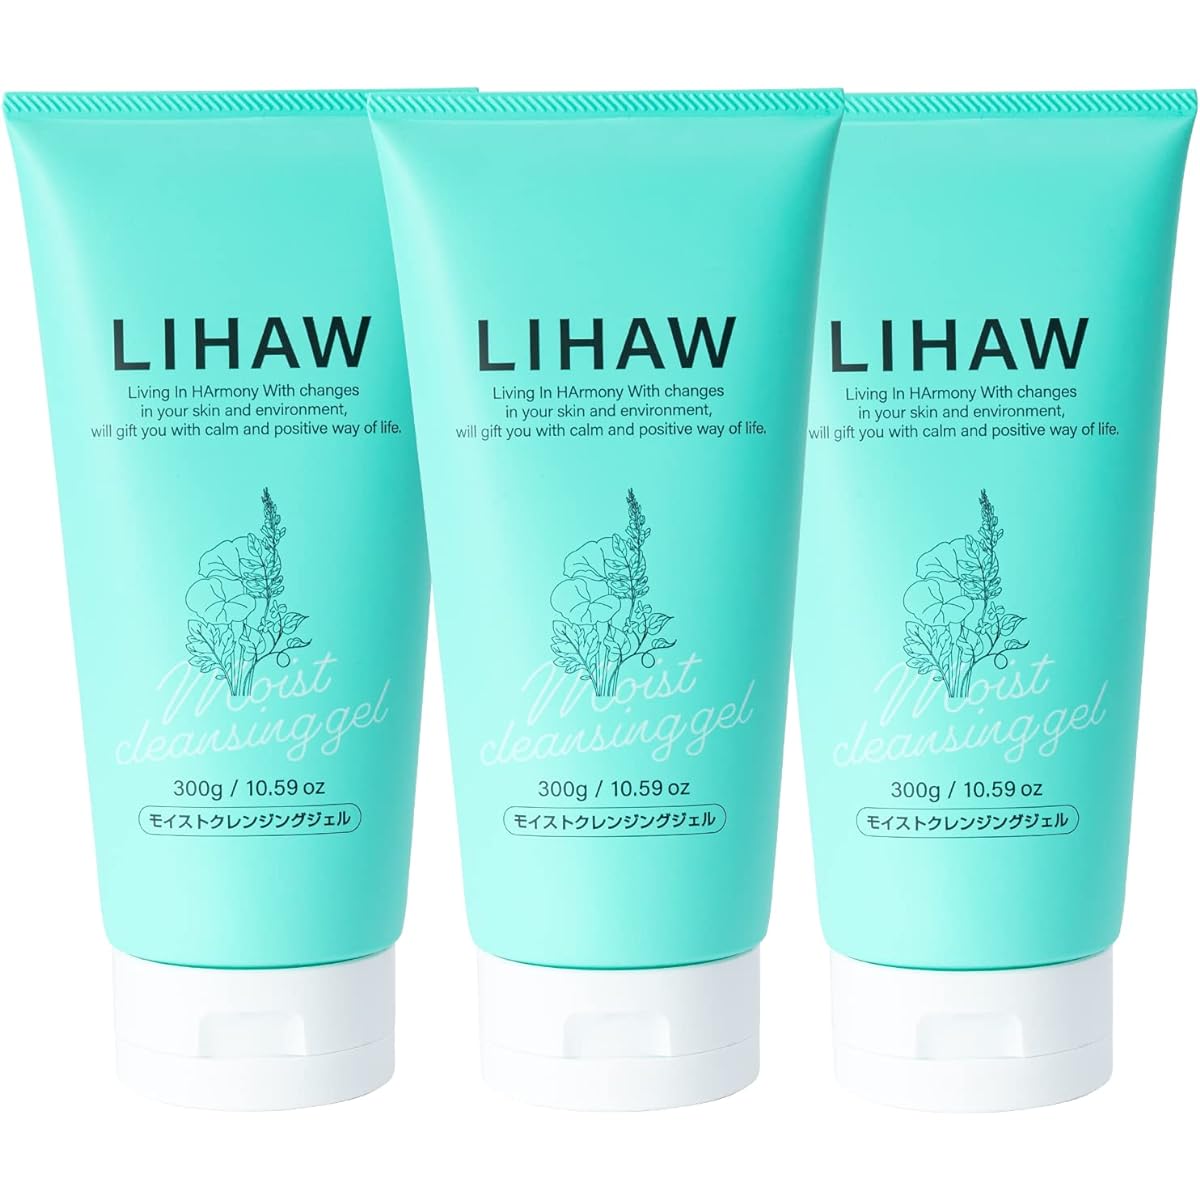 LIHAW Moist Cleansing Gel [No need to wash your face twice] Oil-in-gel with CICA Eyelash extensions OK 300g x 3 bottles